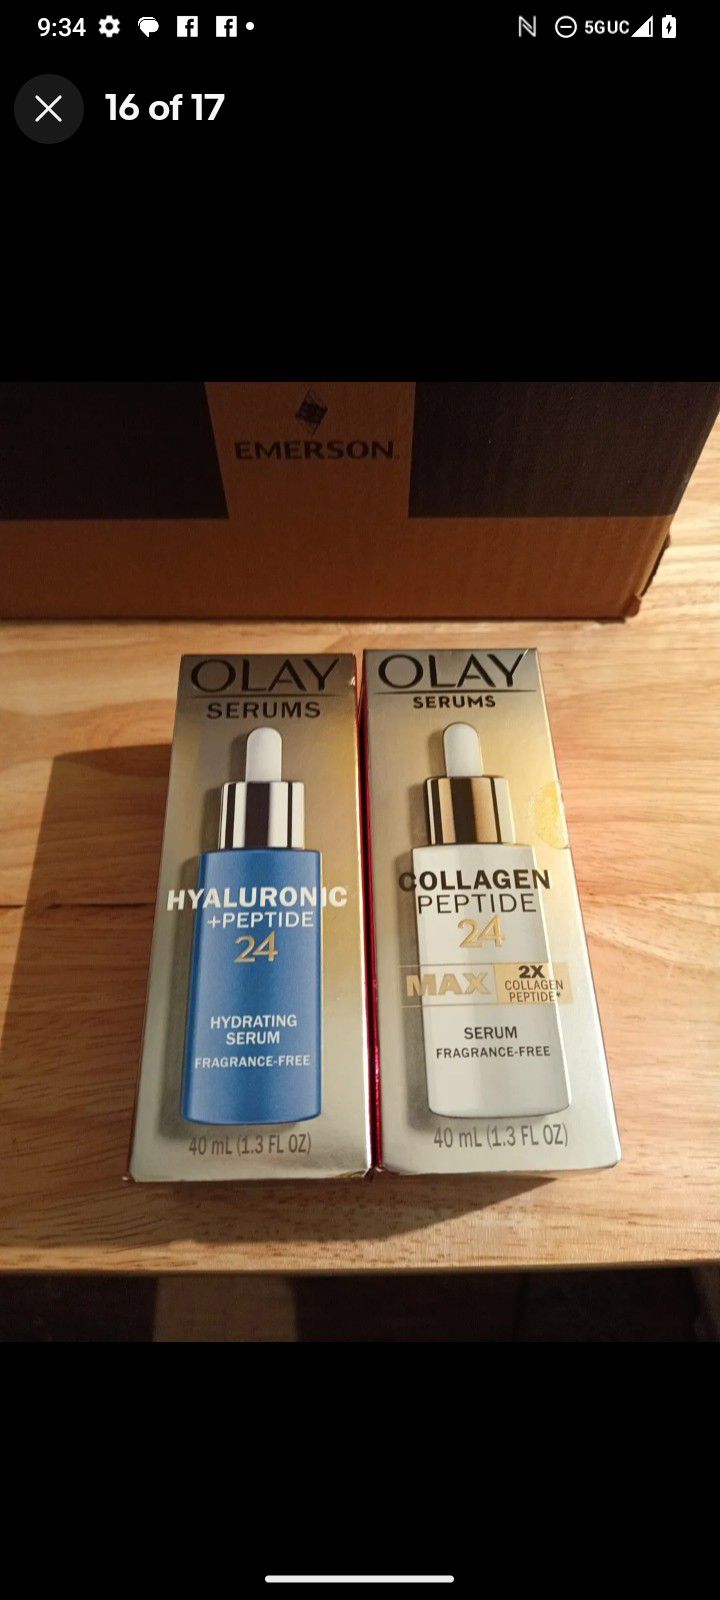 Olay New Set Of 2 40 Ml Each Fragrance Free Collagen Peptide 24 & Peptide 24 Max Hydrating Serums Boxed